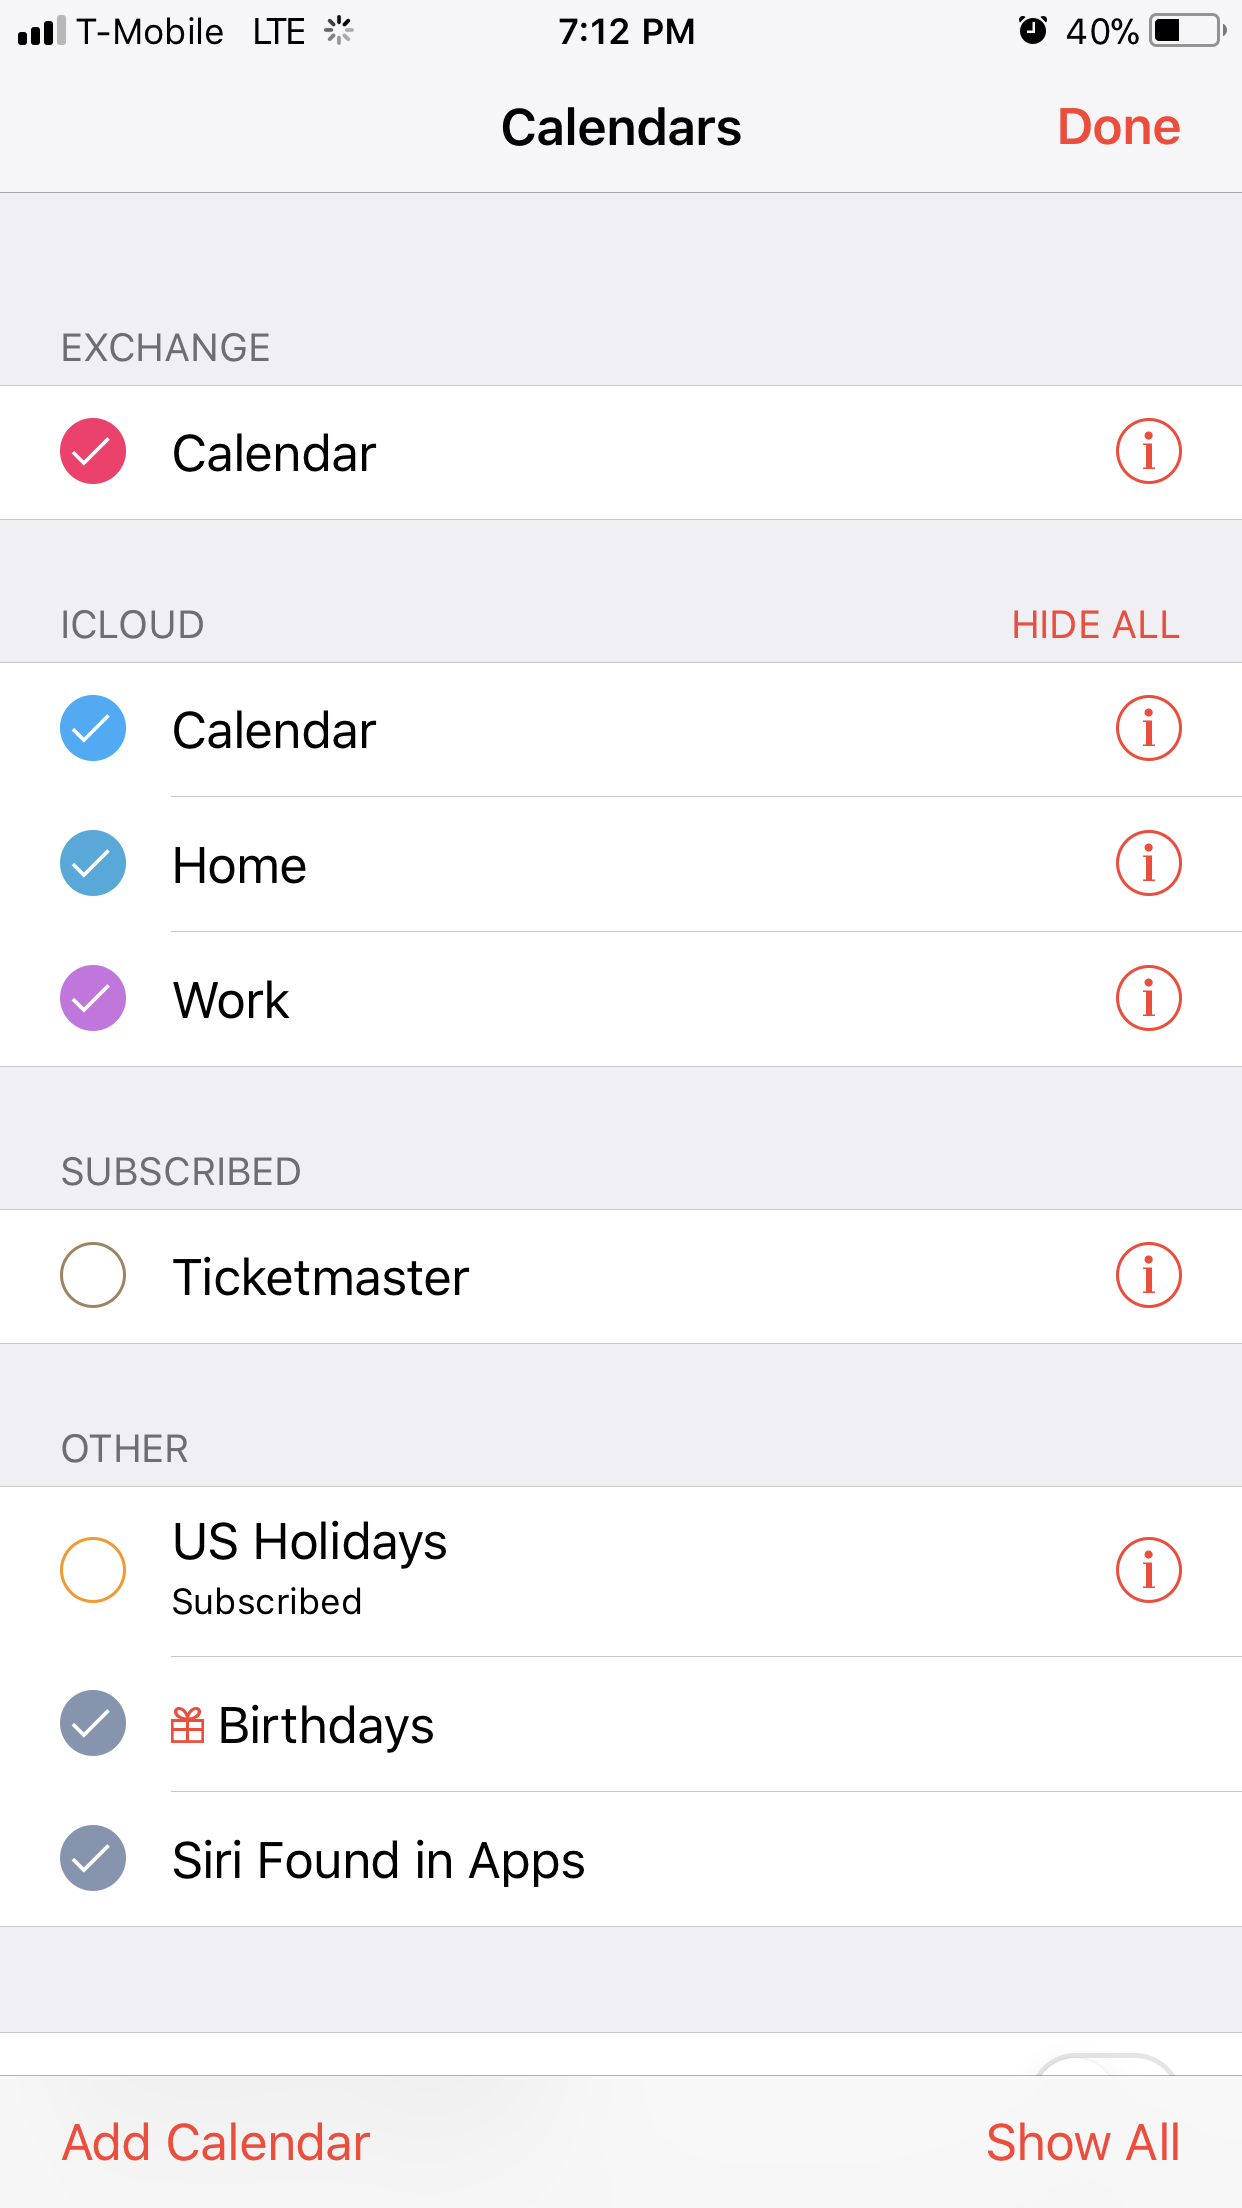 How To Get Rid Of Subscribed Calendars On Iphone Price 1